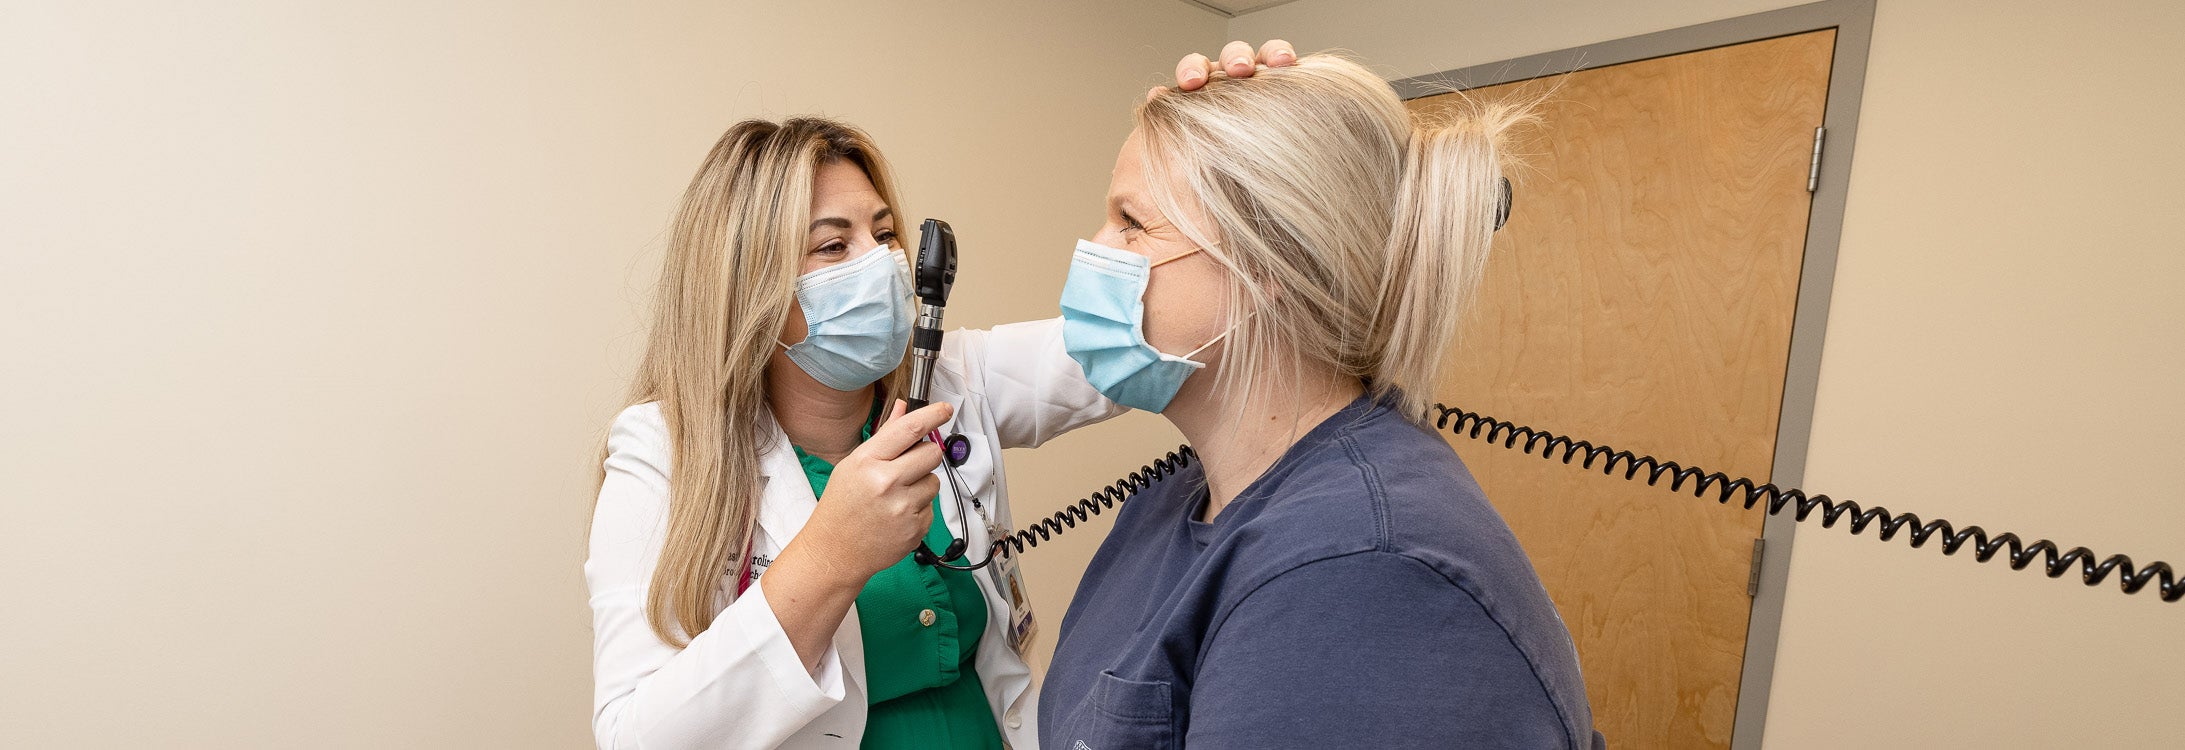 Dr. Amy White-Jones, one of the first residents in Brody and ECU Health’s Rural Family Medicine Residency program, examines a patient at Goshen Medical Center in Beulaville.